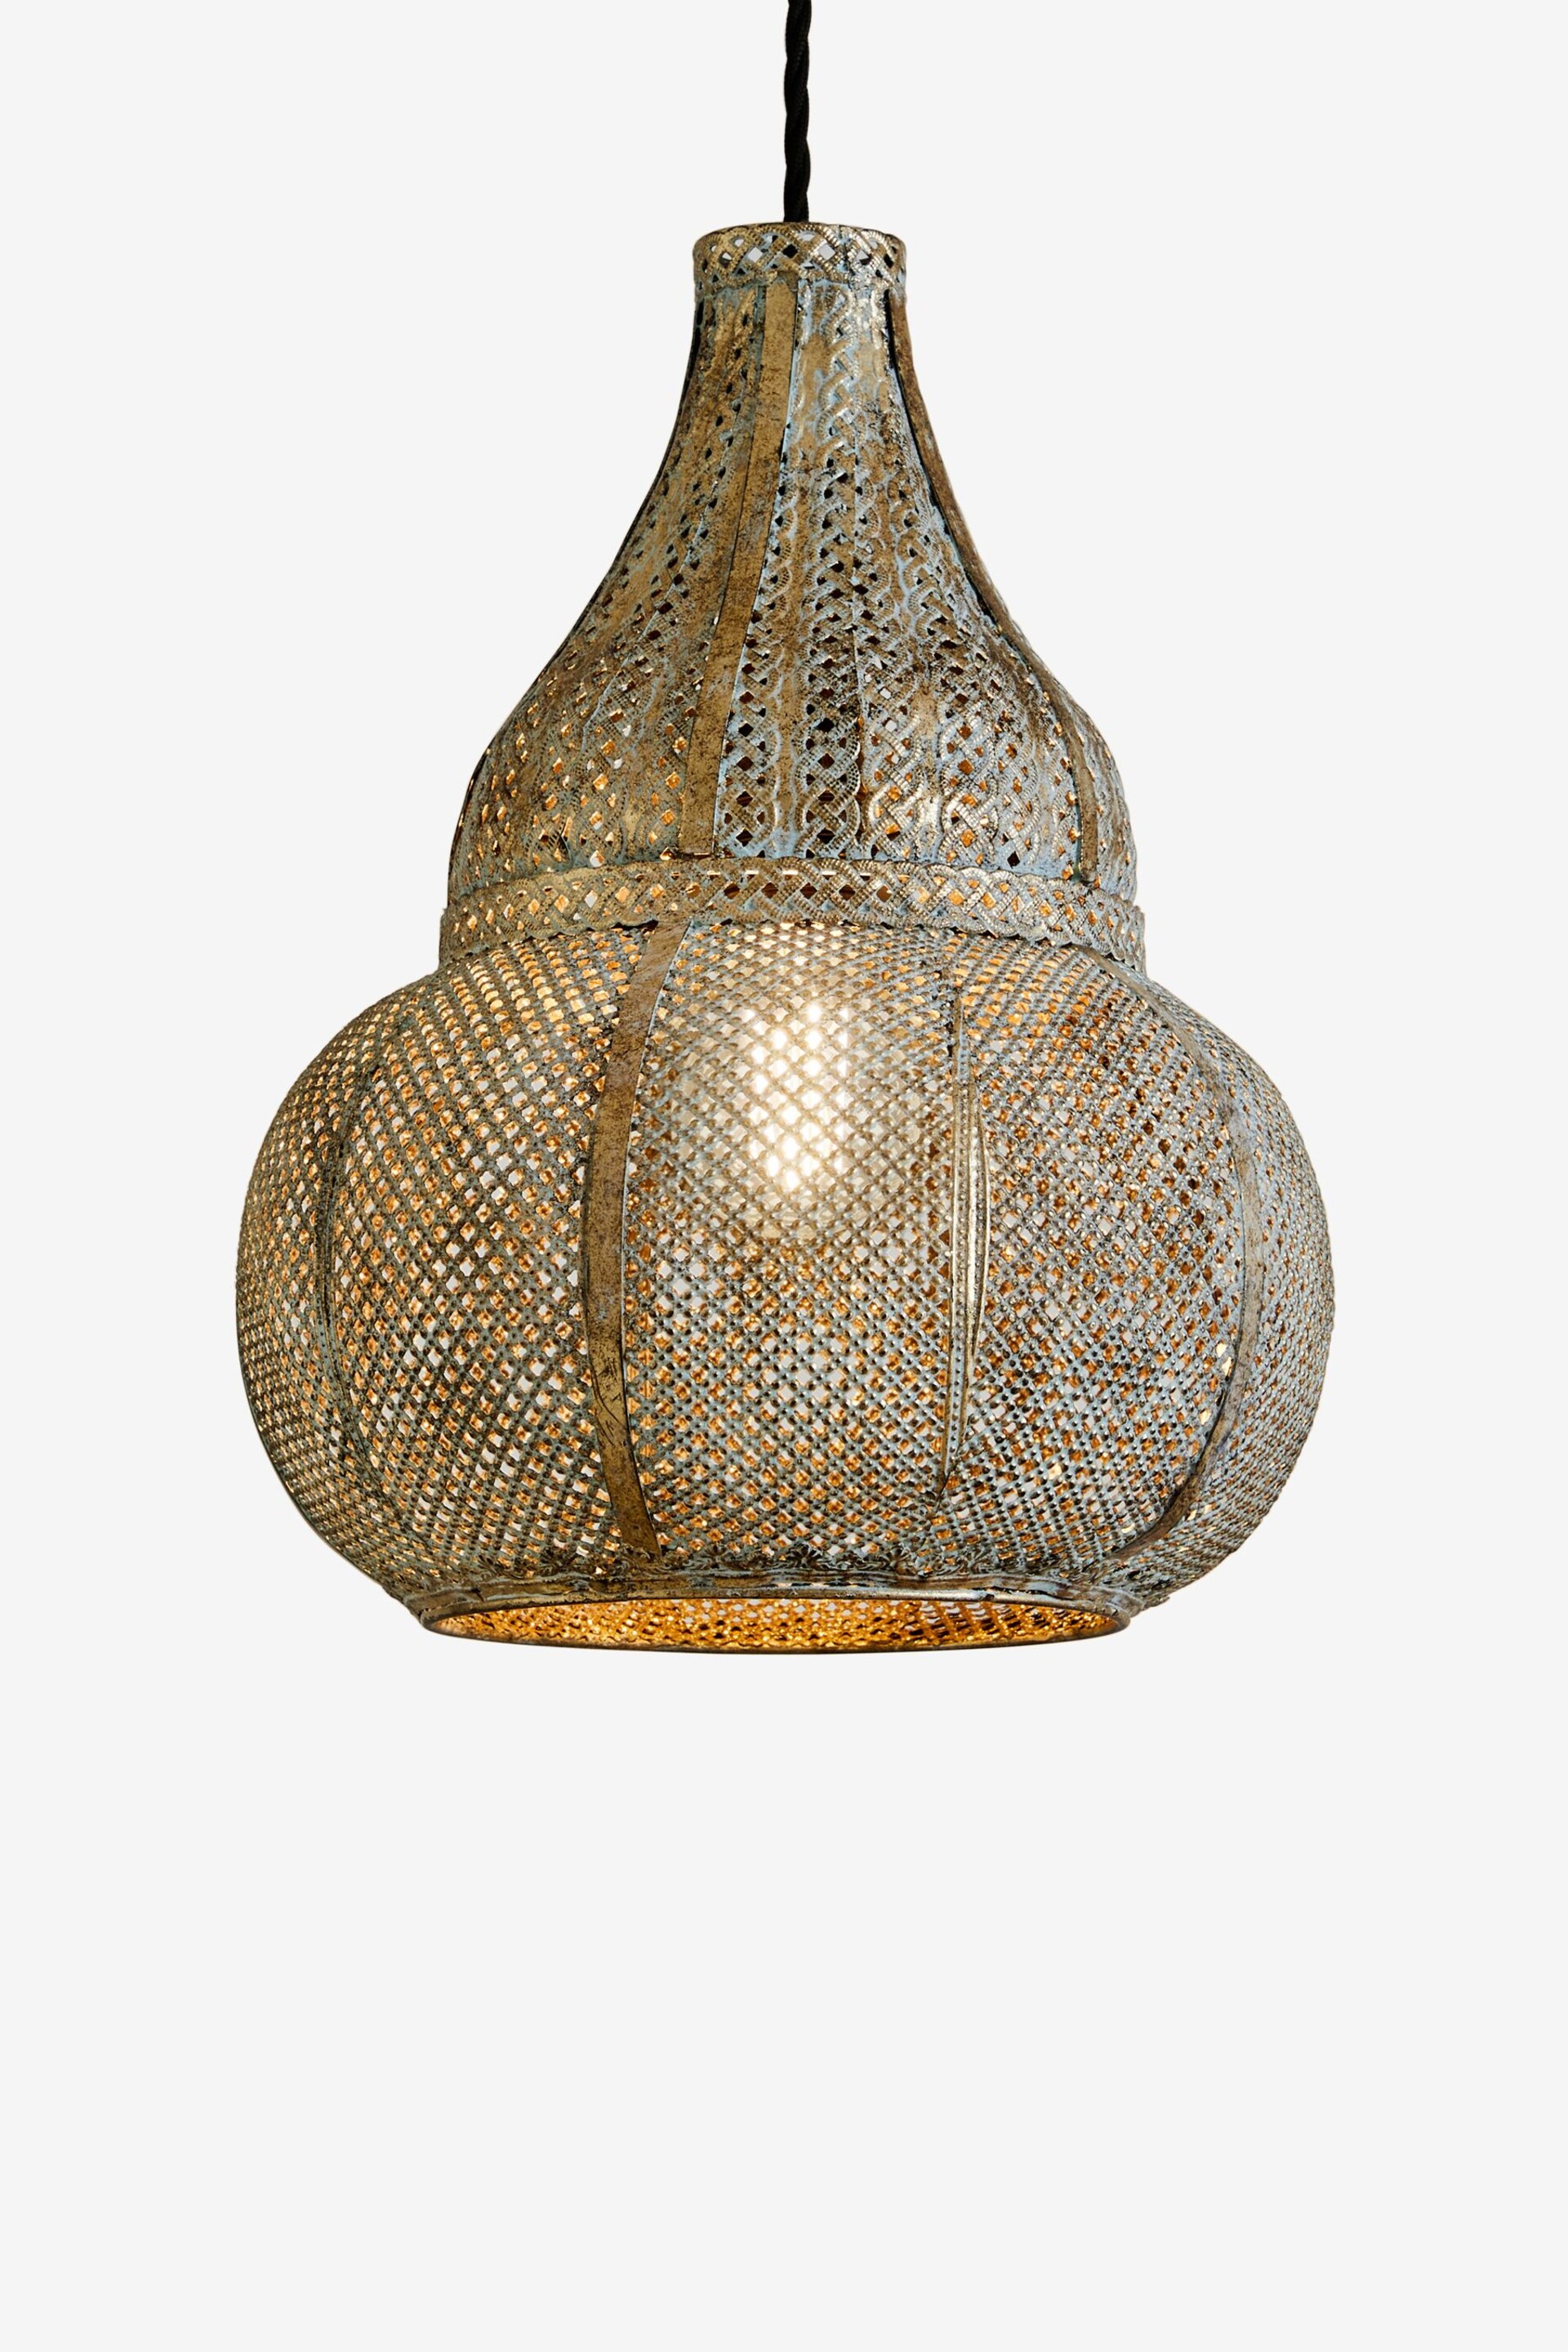 Brushed Silver Tangier Easy Fit Pendant Light Shade - Image 7 of 7